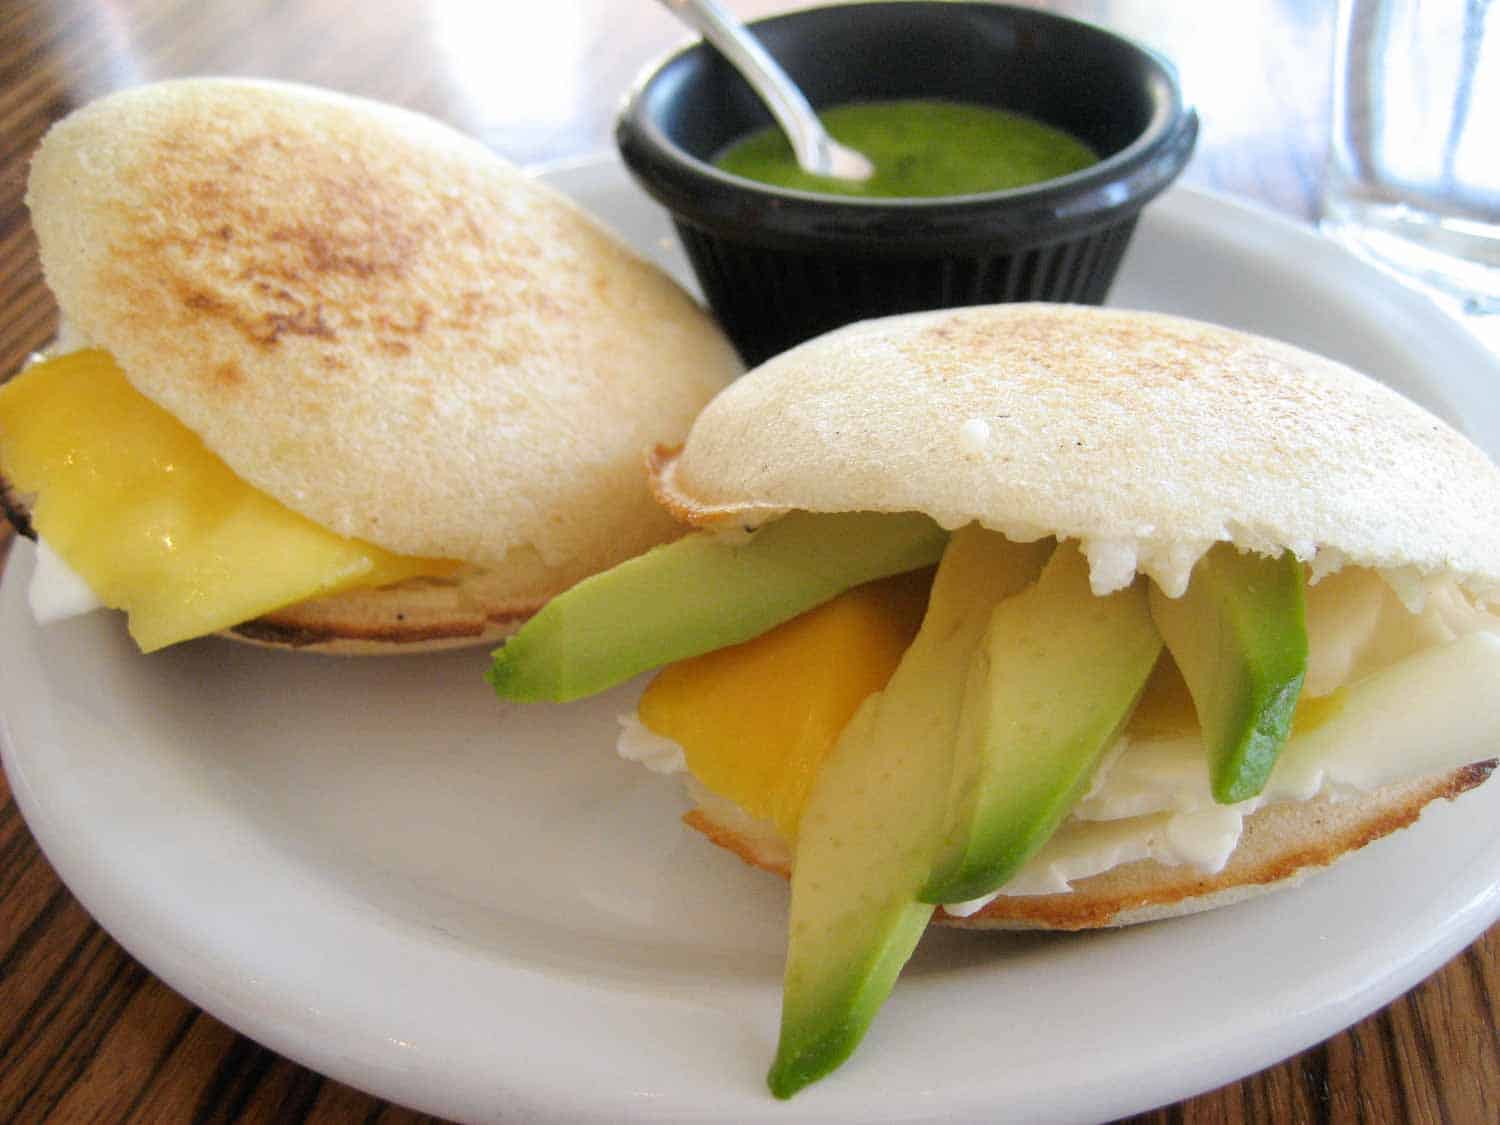 Arepas are a common street food in Panama and have many fillings.